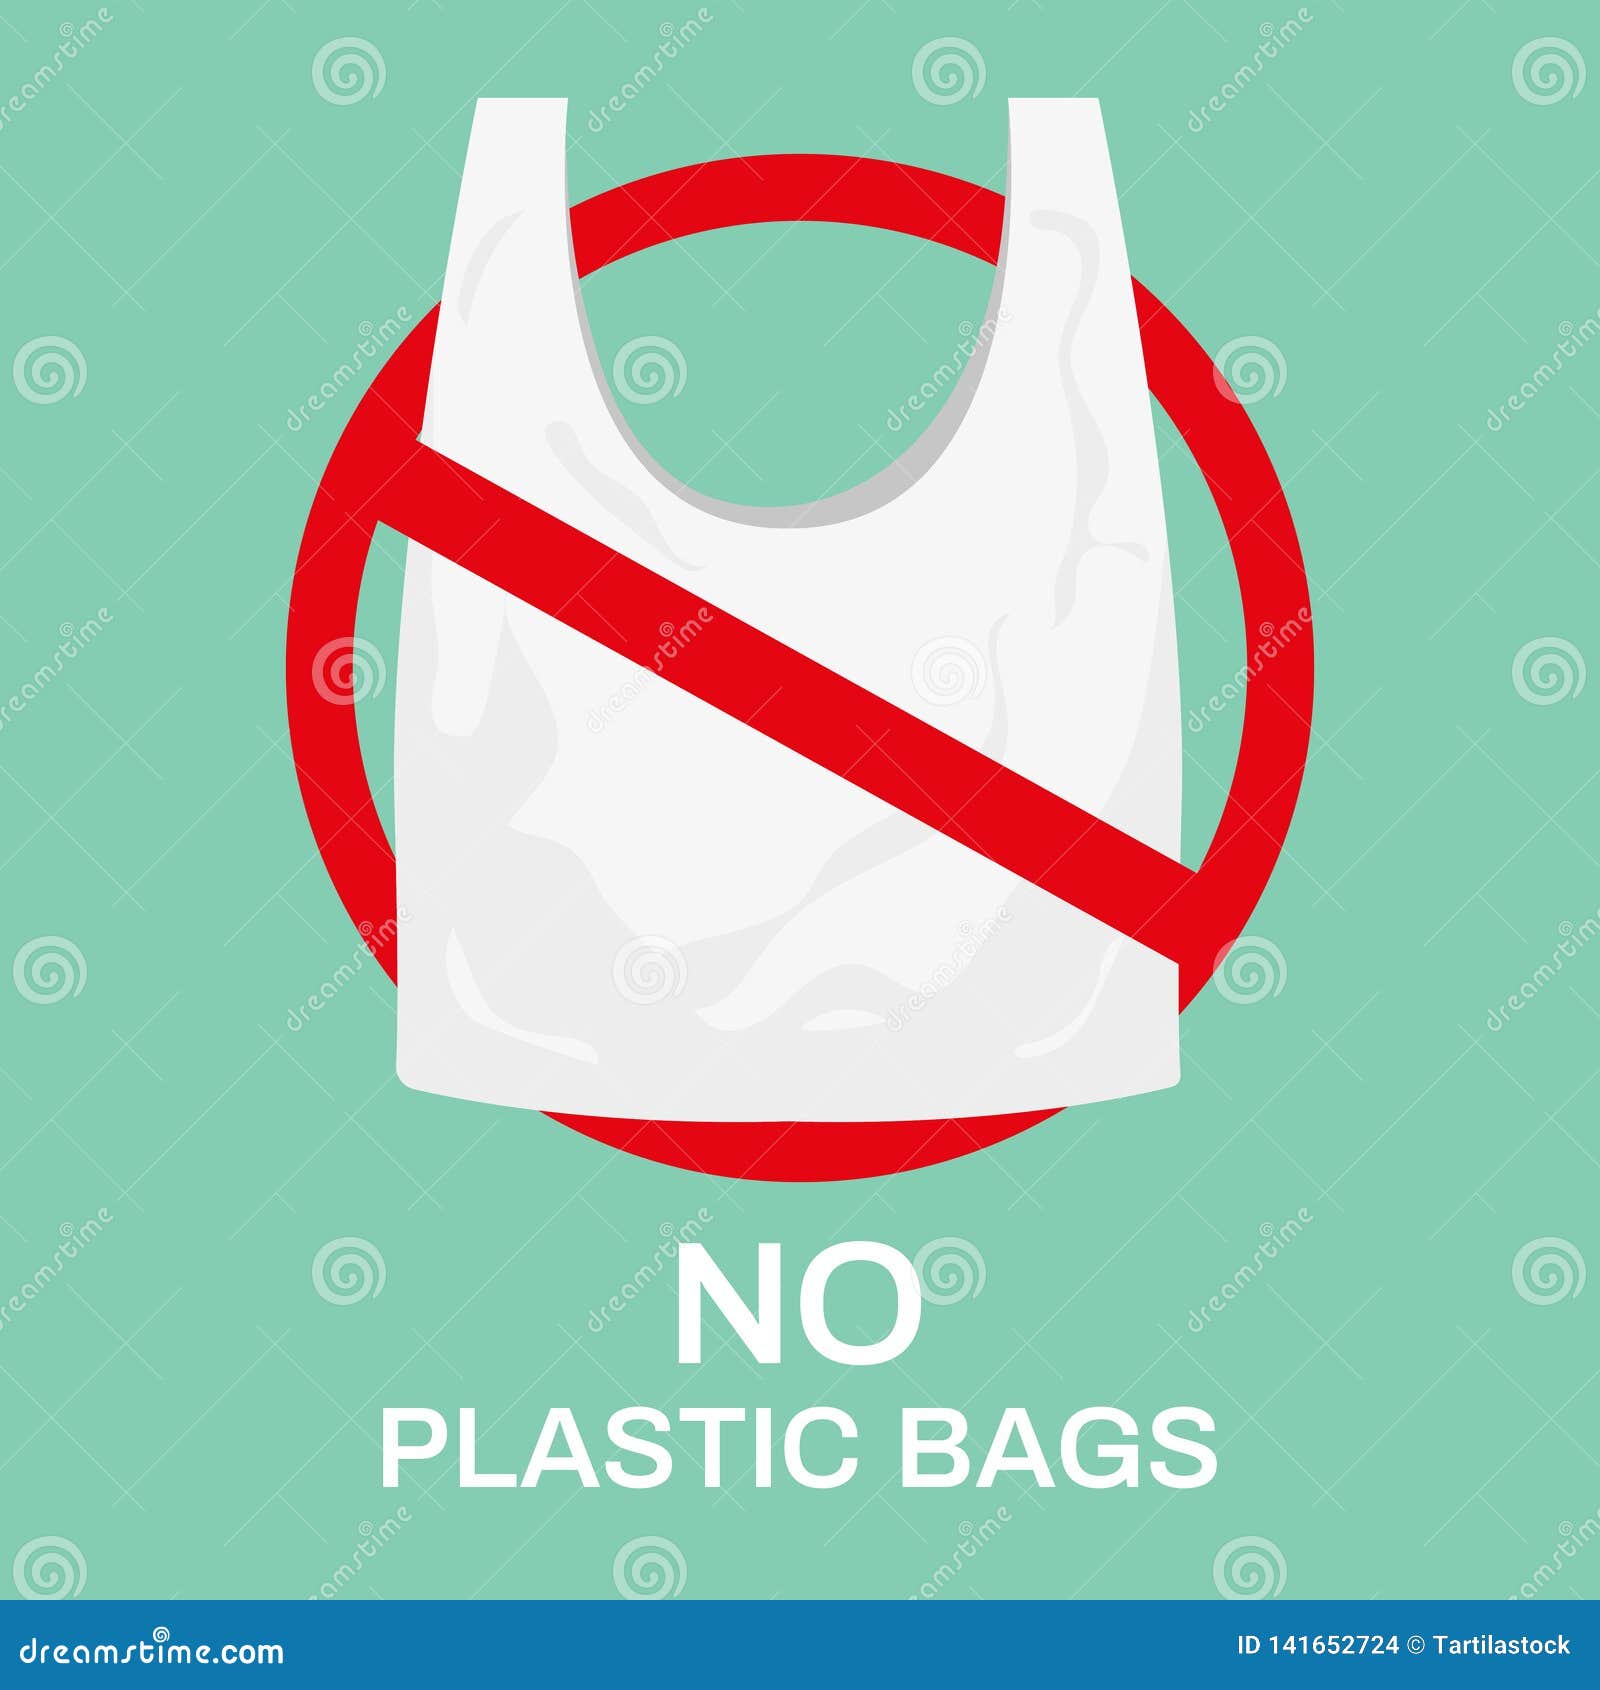 No Plastic Bags. Eco Shopping Bag, Market Recycle Bags and Stop Using ...